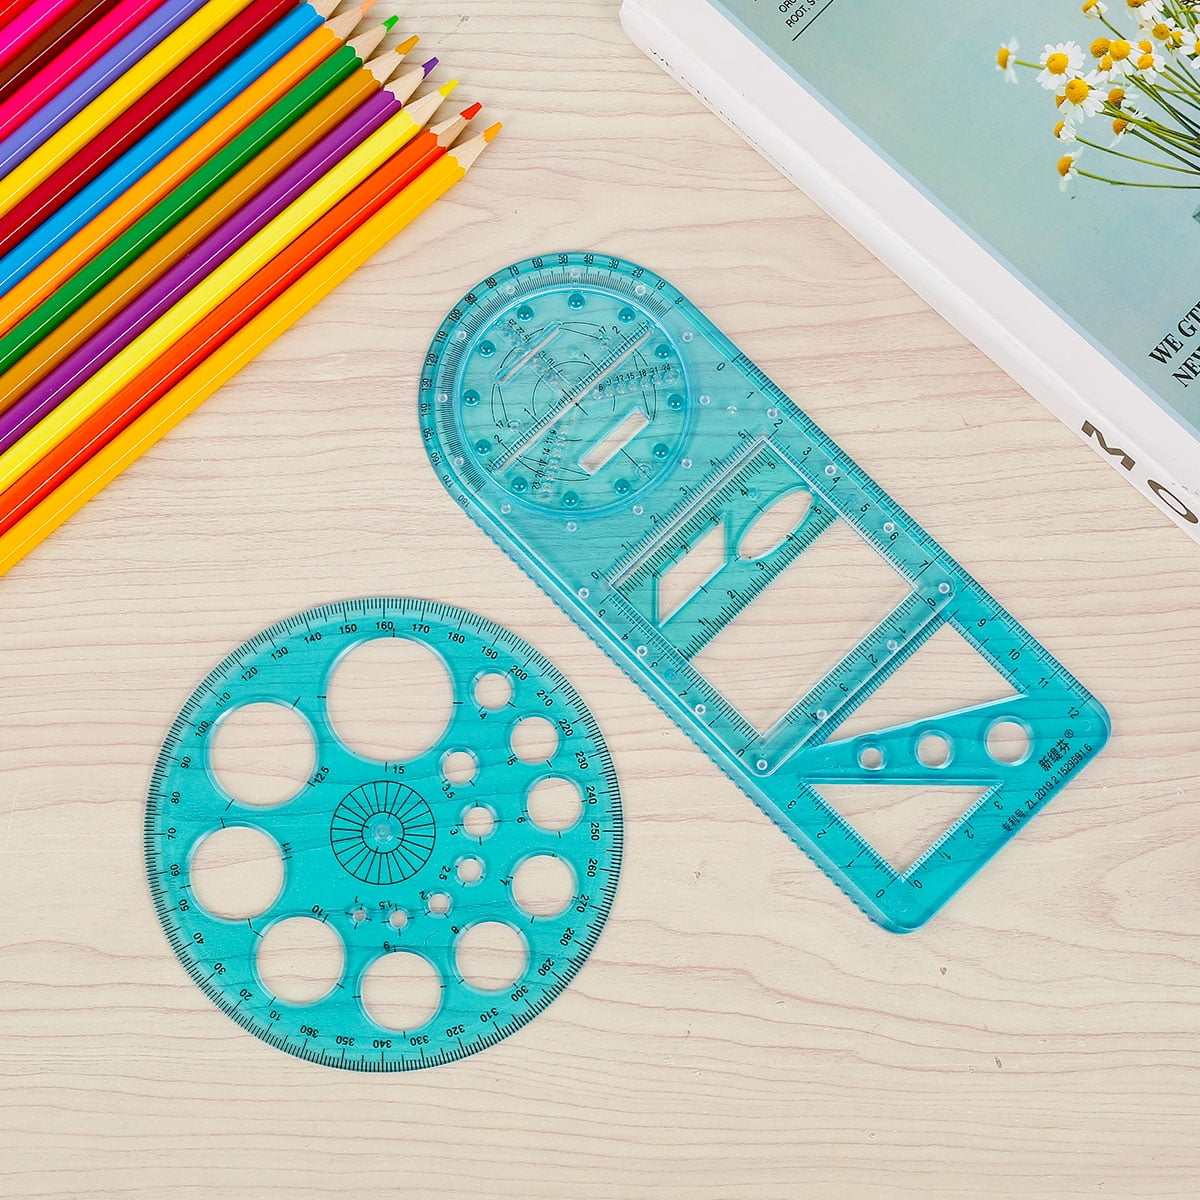 3 Pcs Multifunctional Geometric Ruler Mathematics Drawing Ruler 360 Degree Protractor Plastic Draft Rulers Elementary School Common Geometric Drawing Template Measuring Tool for Student School Office